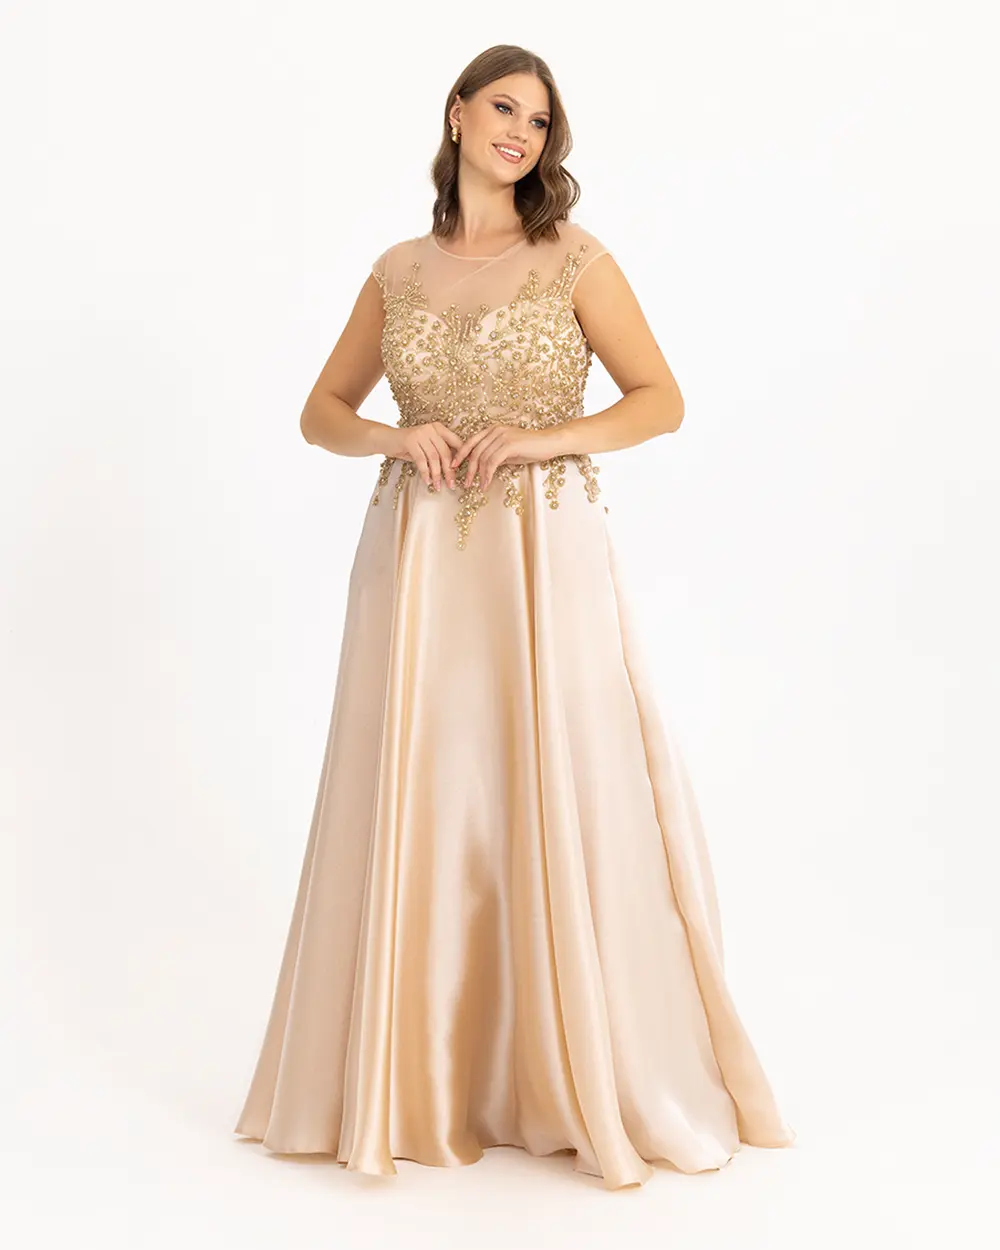  Plus Size Indian Accessoried Satin Look Evening Dress